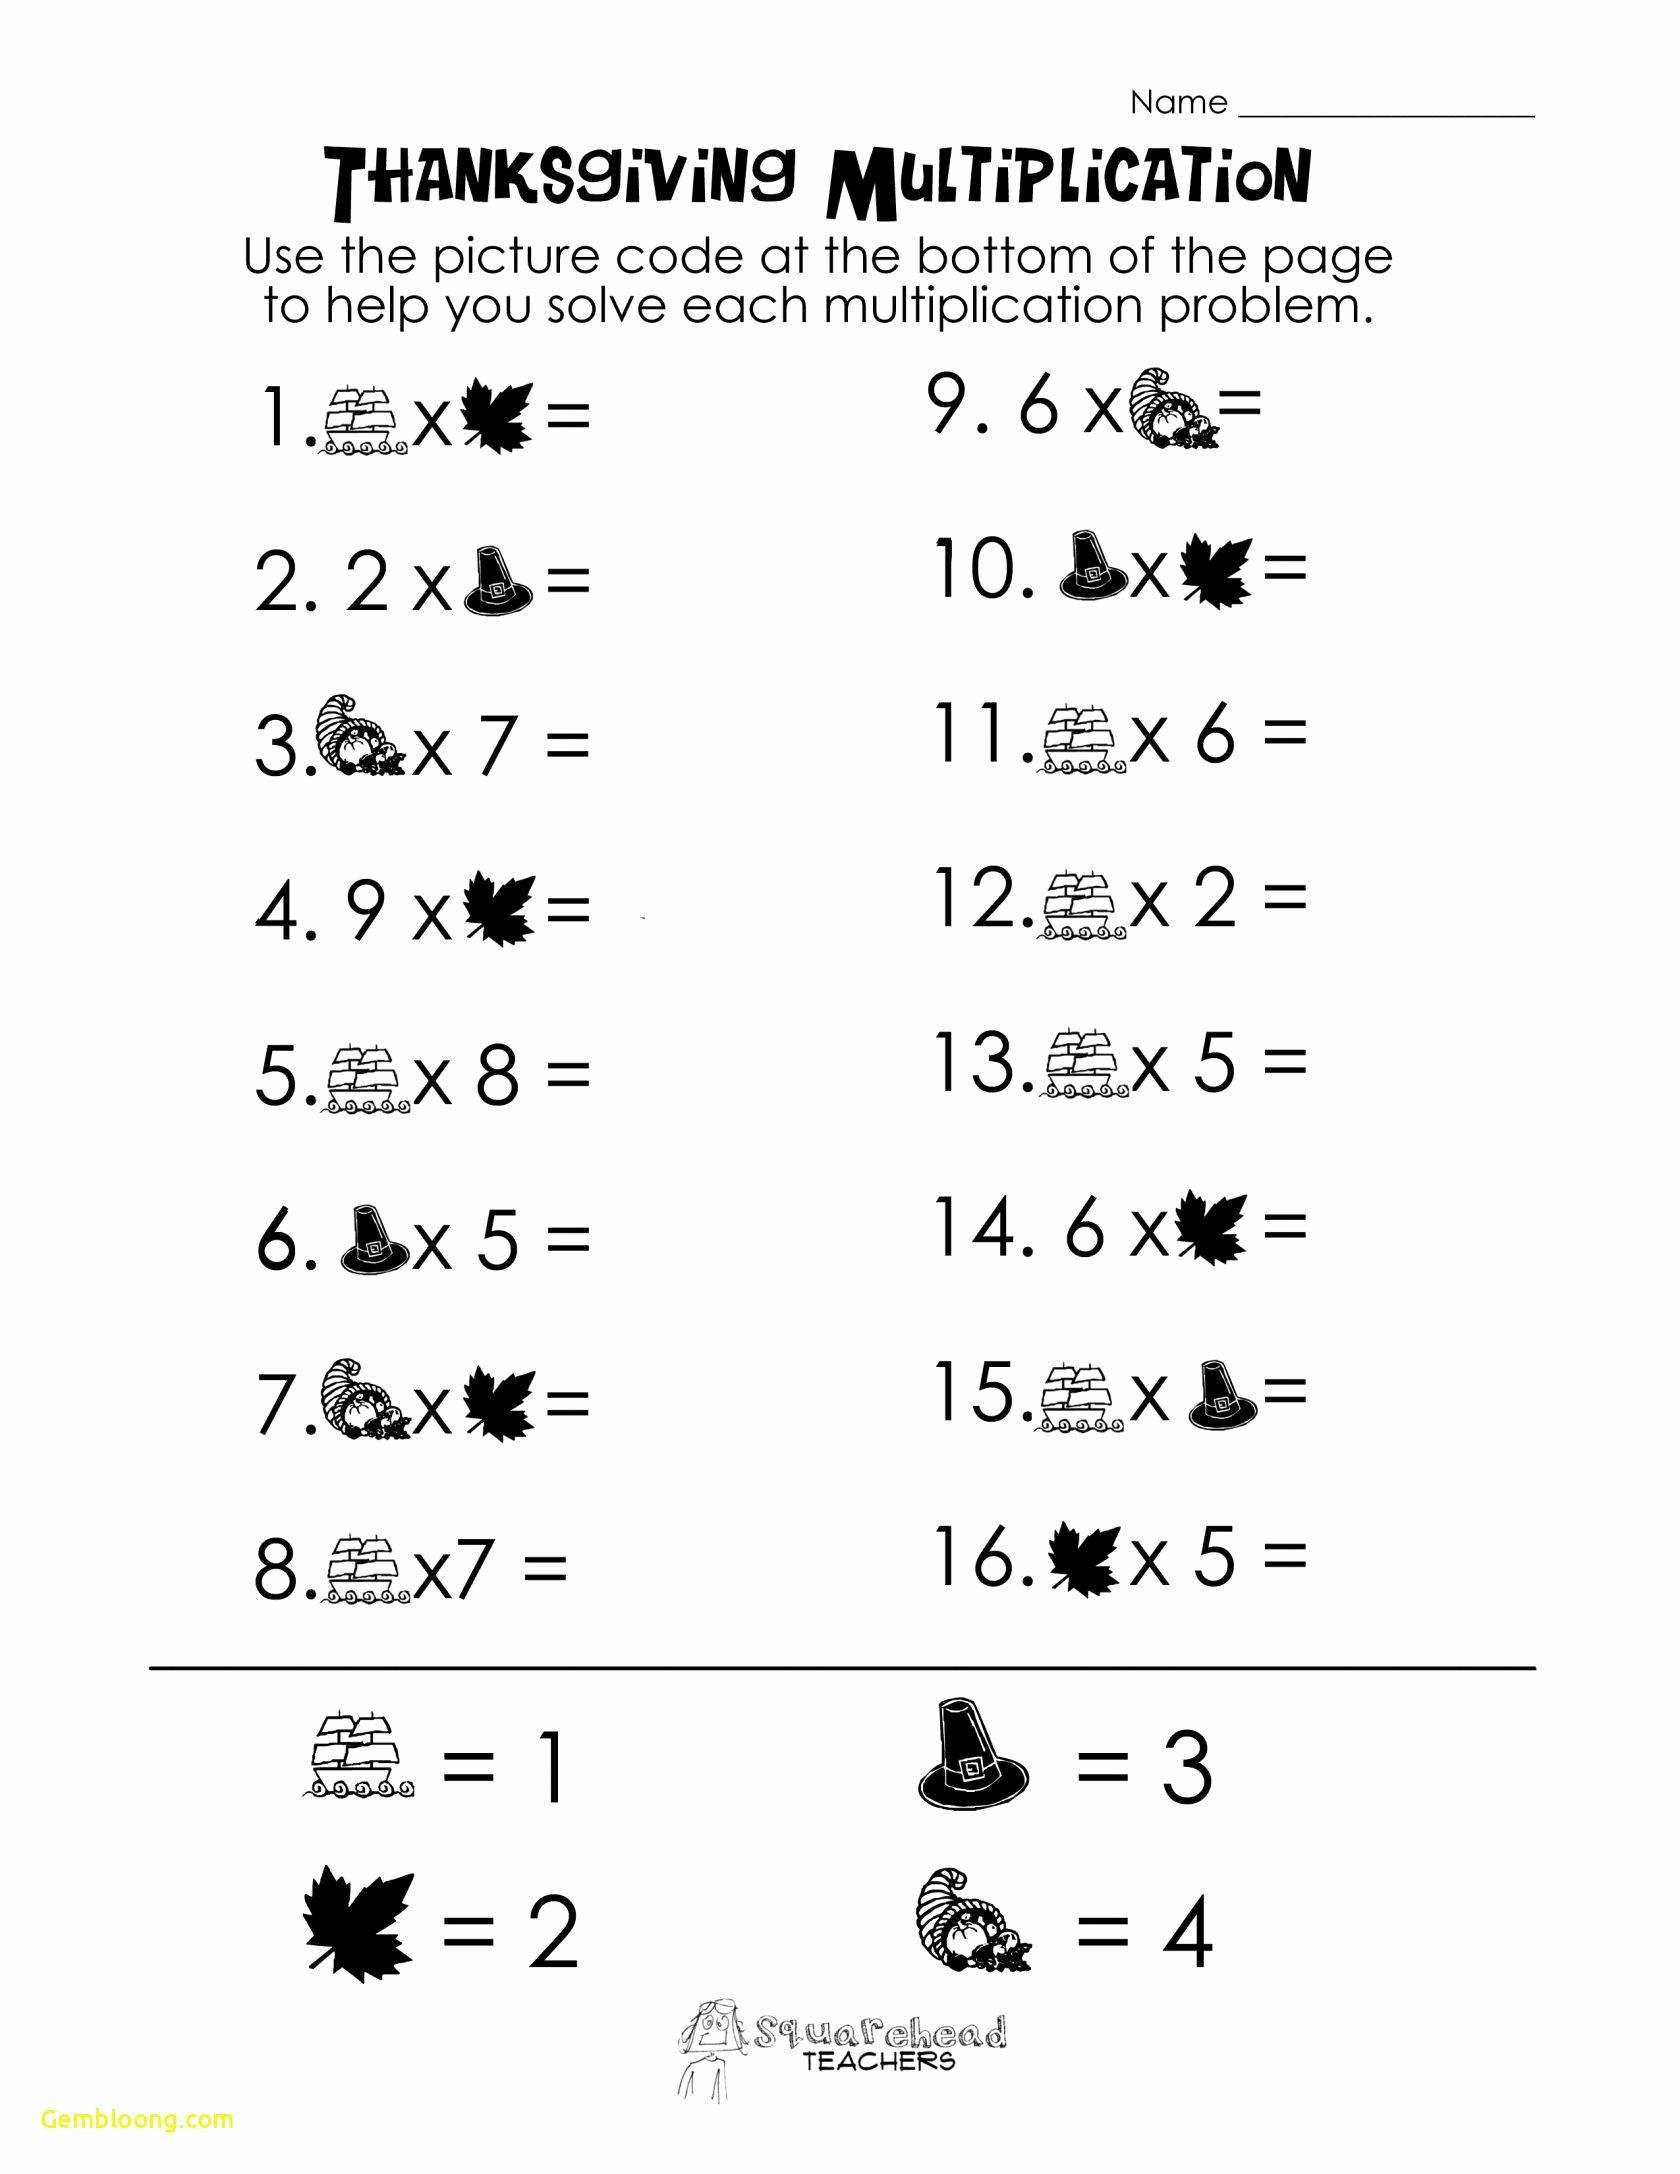 Geometric Sequence and Series Worksheet 50 Geometric Sequences Worksheet Answers In 2020 with